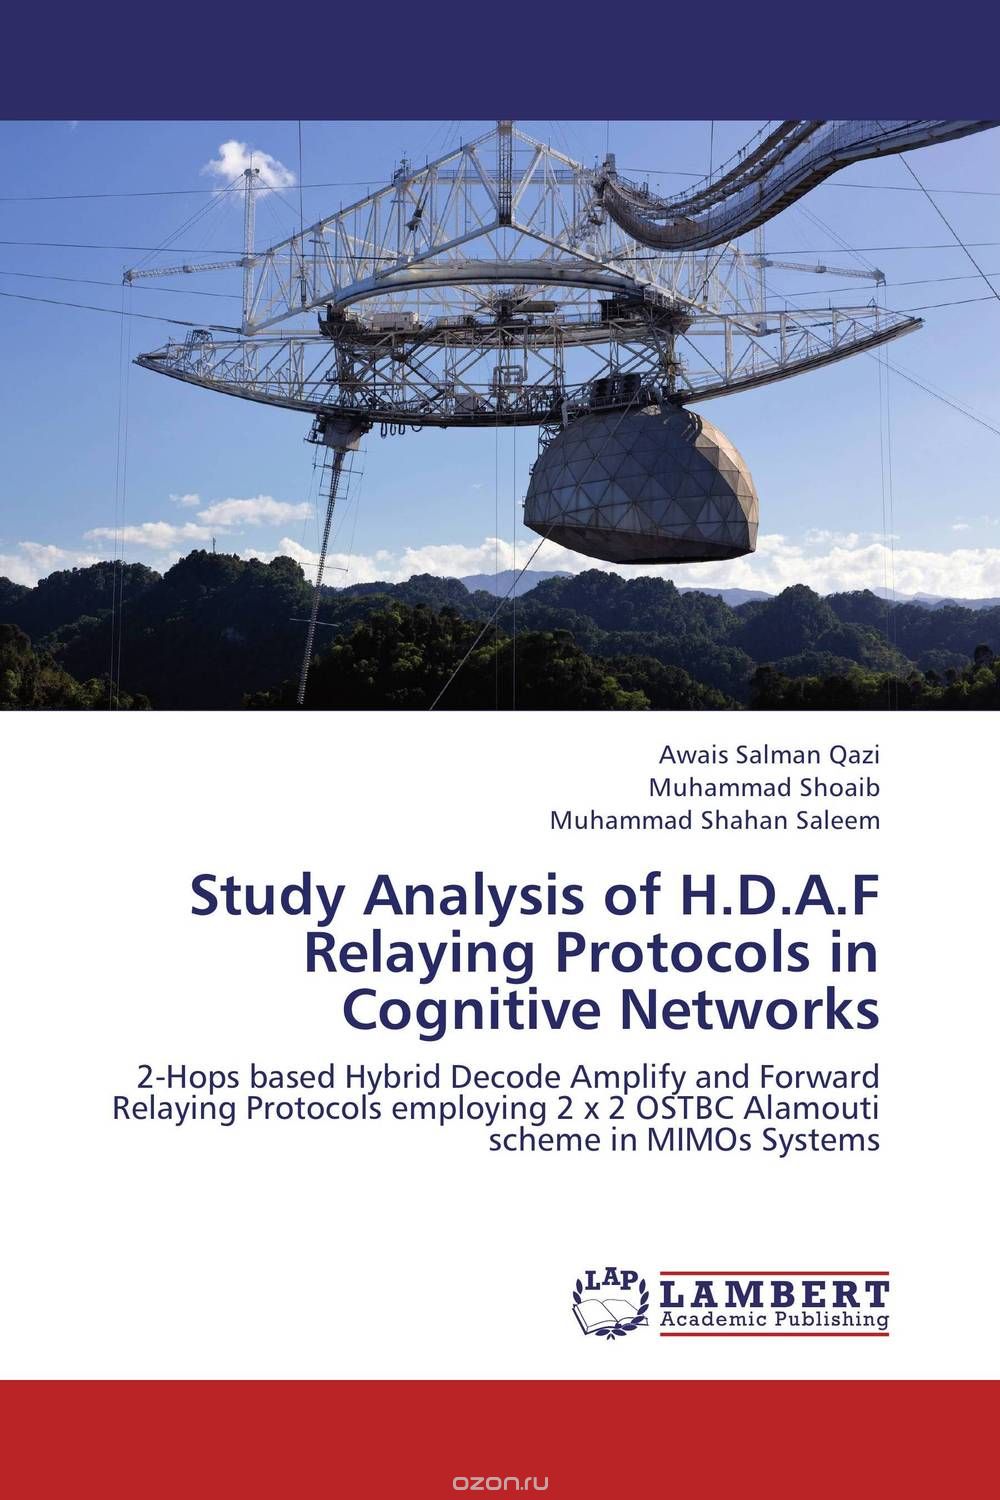 Скачать книгу "Study Analysis of H.D.A.F Relaying Protocols in Cognitive Networks"